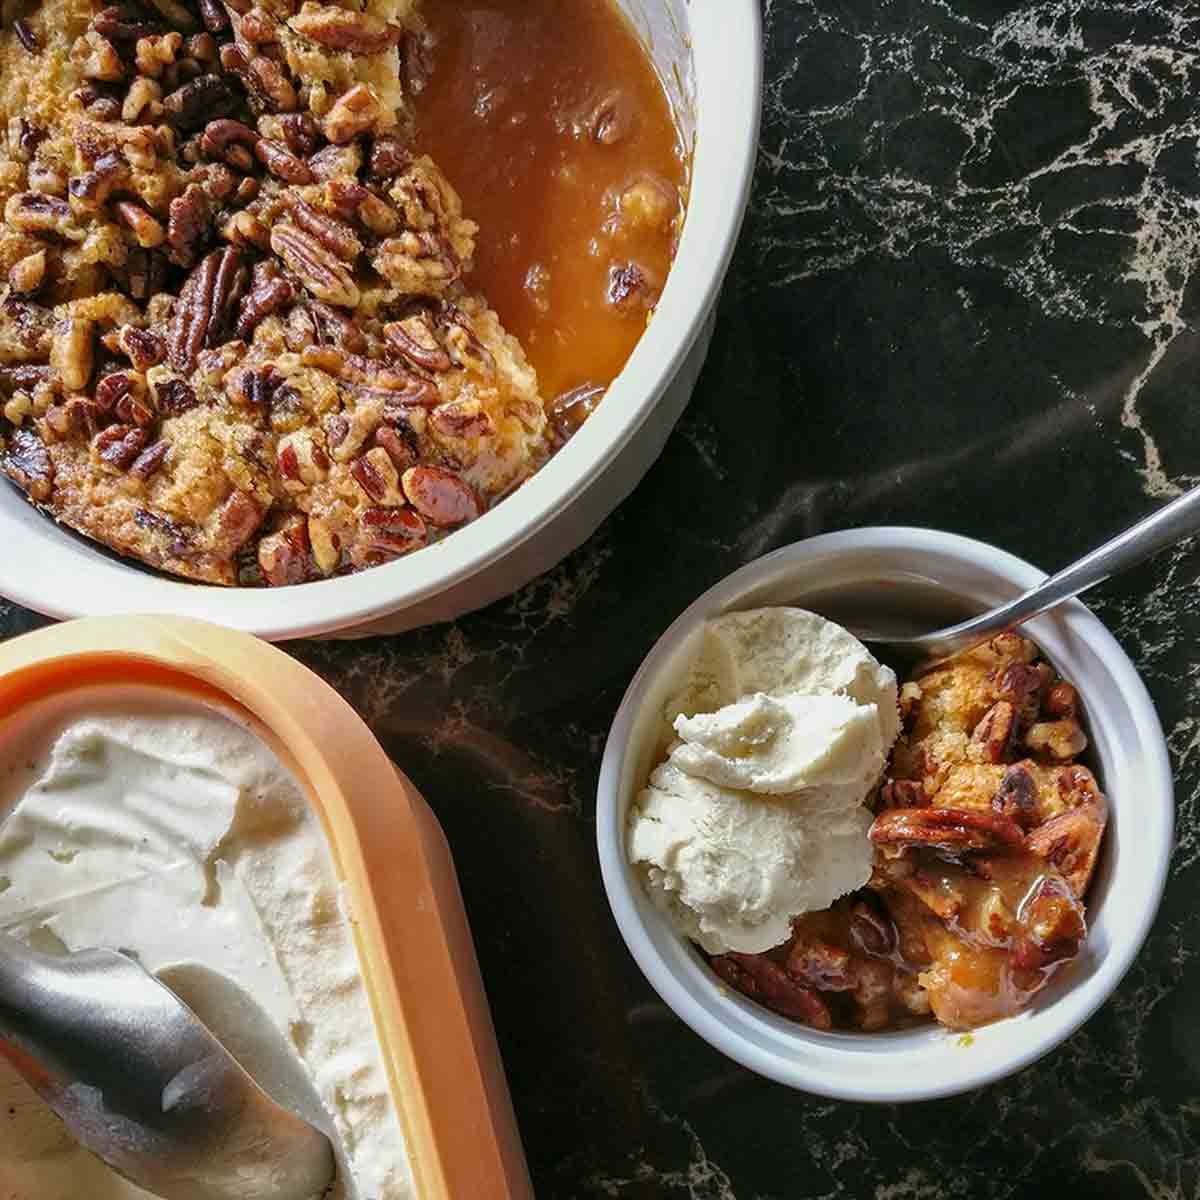 A dish of pecan pie cobbler with a scoop of ice cream on top.